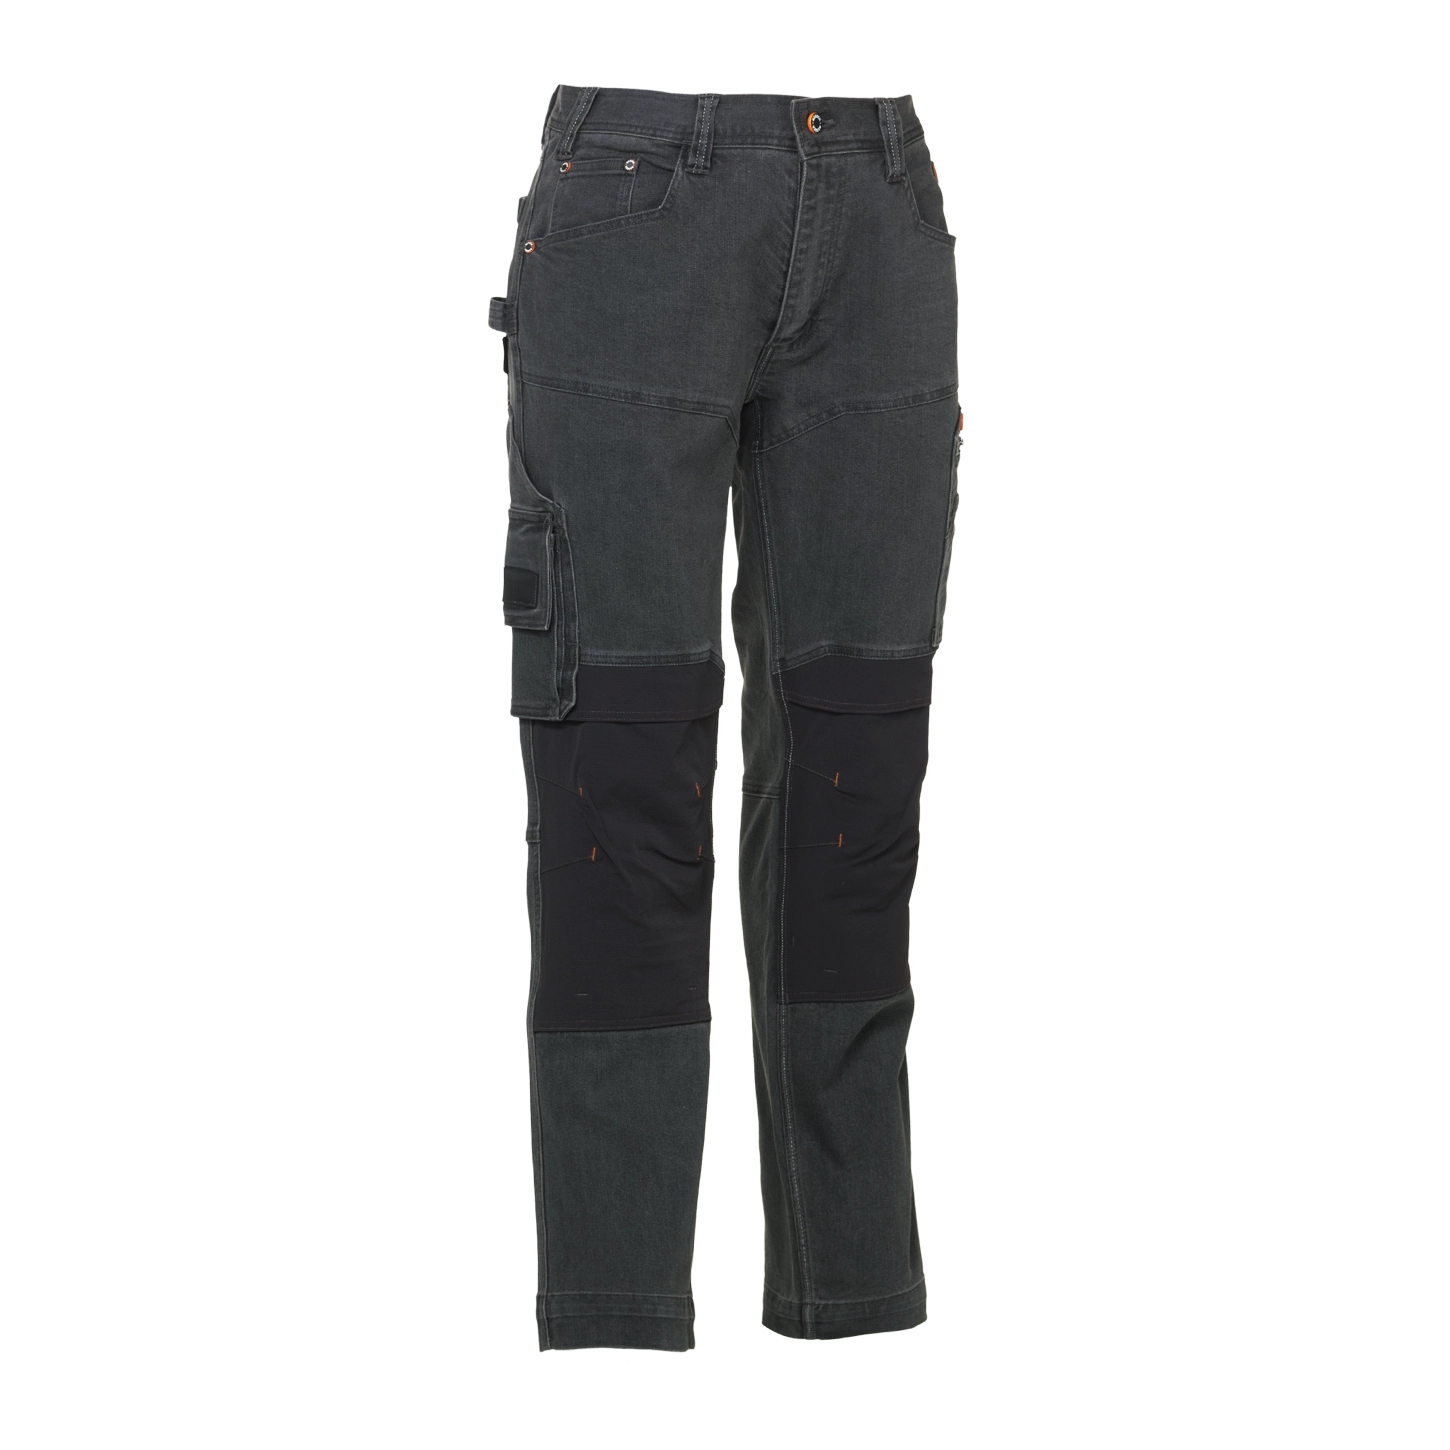 Sphinx Trousers Grey Jeans 36